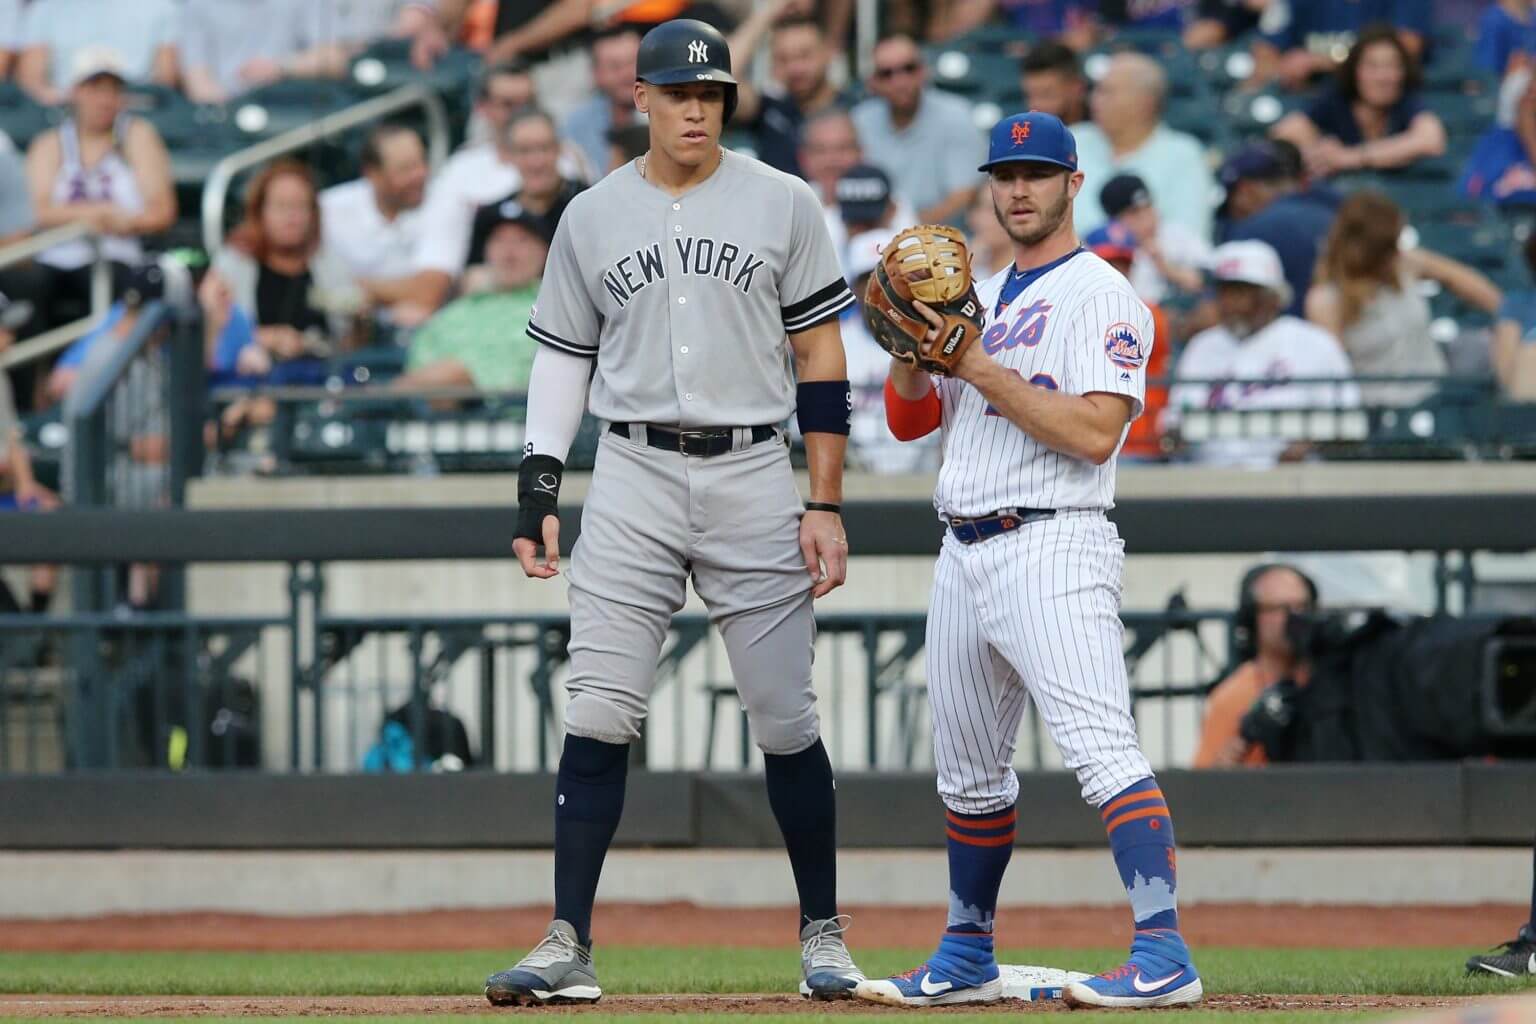 Yankees and Mets face off in Subway Series on September 11 – Bronx Times